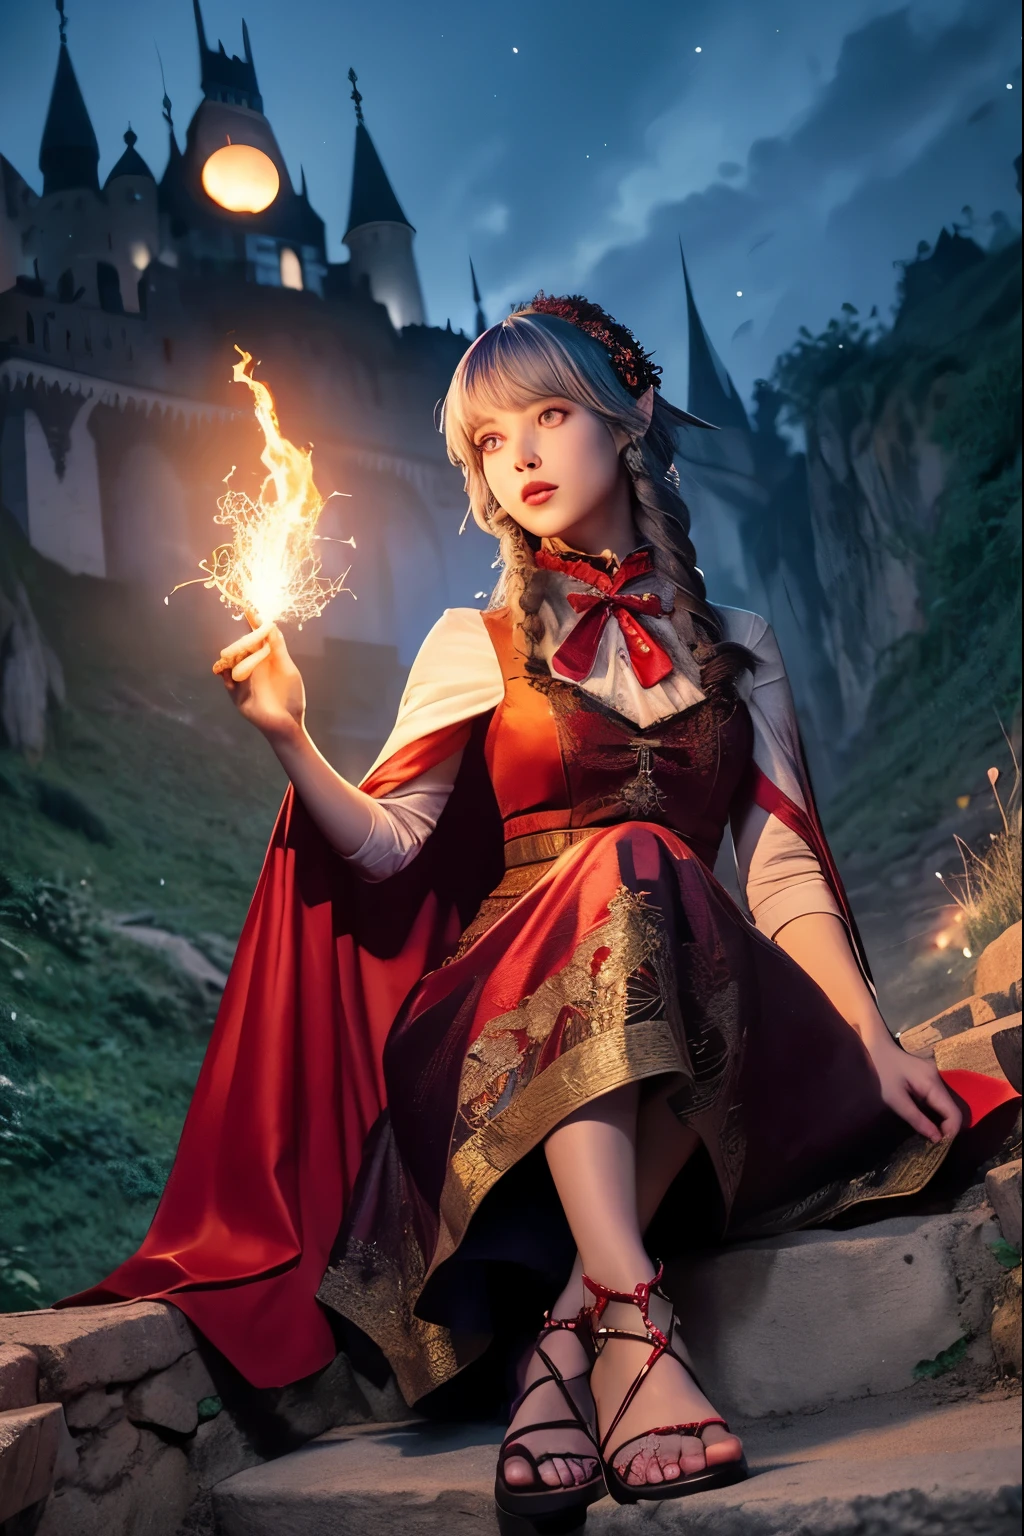 (Ultra-detailed face, Roar, shout), (Fantasy Illustration with Gothic & Ukiyo-e & Comic Art), (Full Body, A middle-aged dark elf woman with gray hair, blunt bangs, Very long disheveled hair, and dark purple skin, lavender eyes), (She shrieks, howls, and is covered in sparkling magical dust, skipping, waving her hands widely, and casting flaming spells in daring poses), BREAK (She wears a bright deep red cape dress of silk, sparkling with traditional and classic embroidery and sequins. She wears deep red braided sandals), BREAK (In the background, we see a red blood-colored moon and Dracula's castle perched atop a steep rocky mountain)